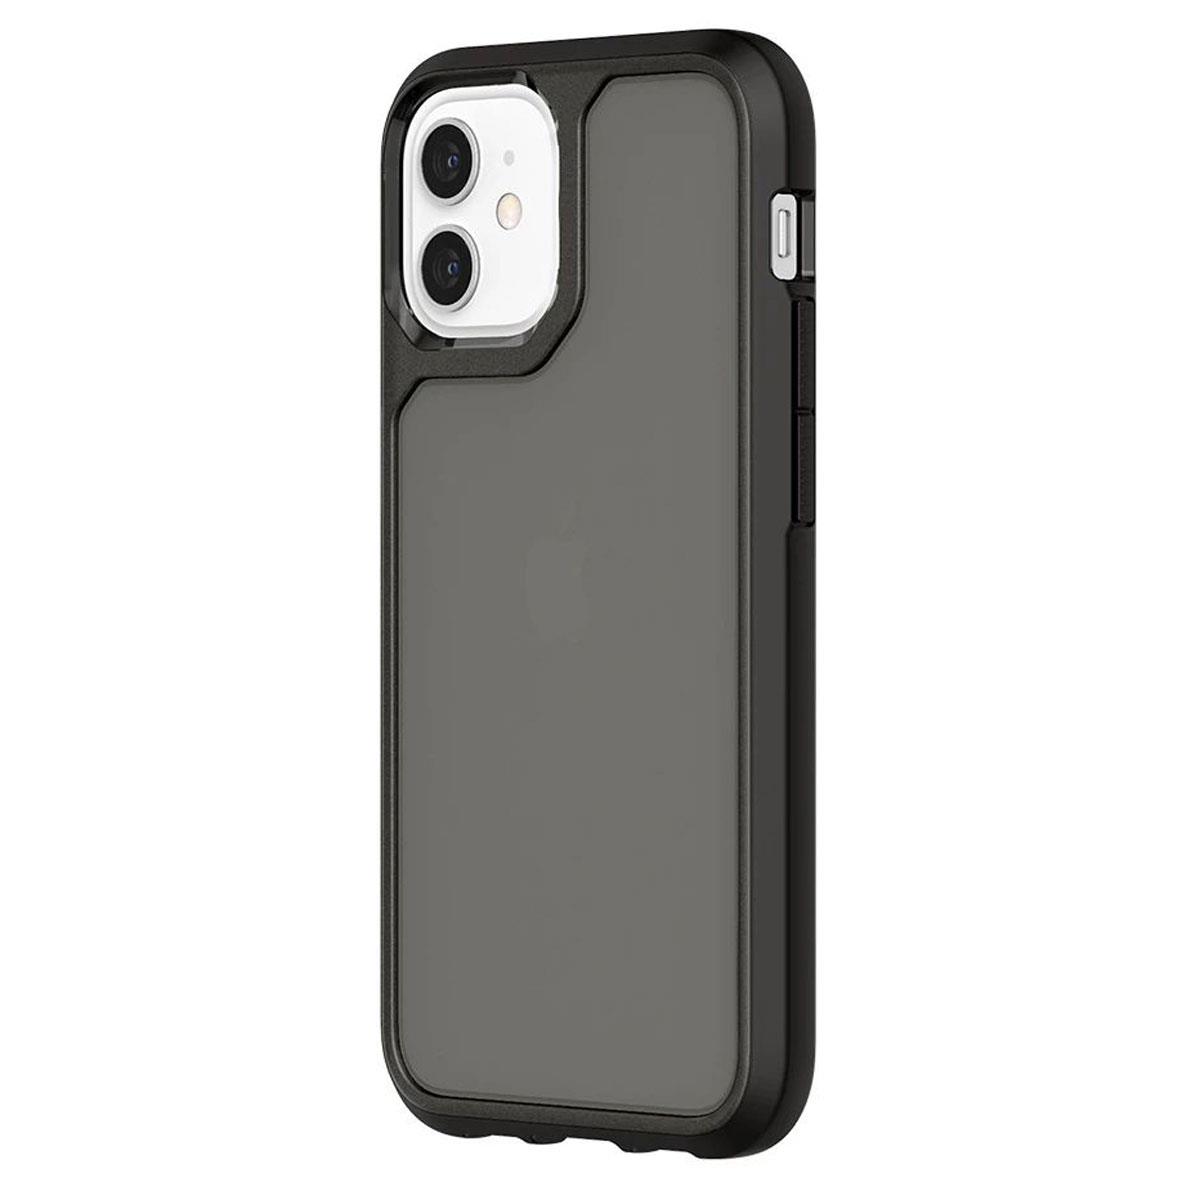 Image of Griffin Technology Survivor Strong Case for iPhone 12 Mini